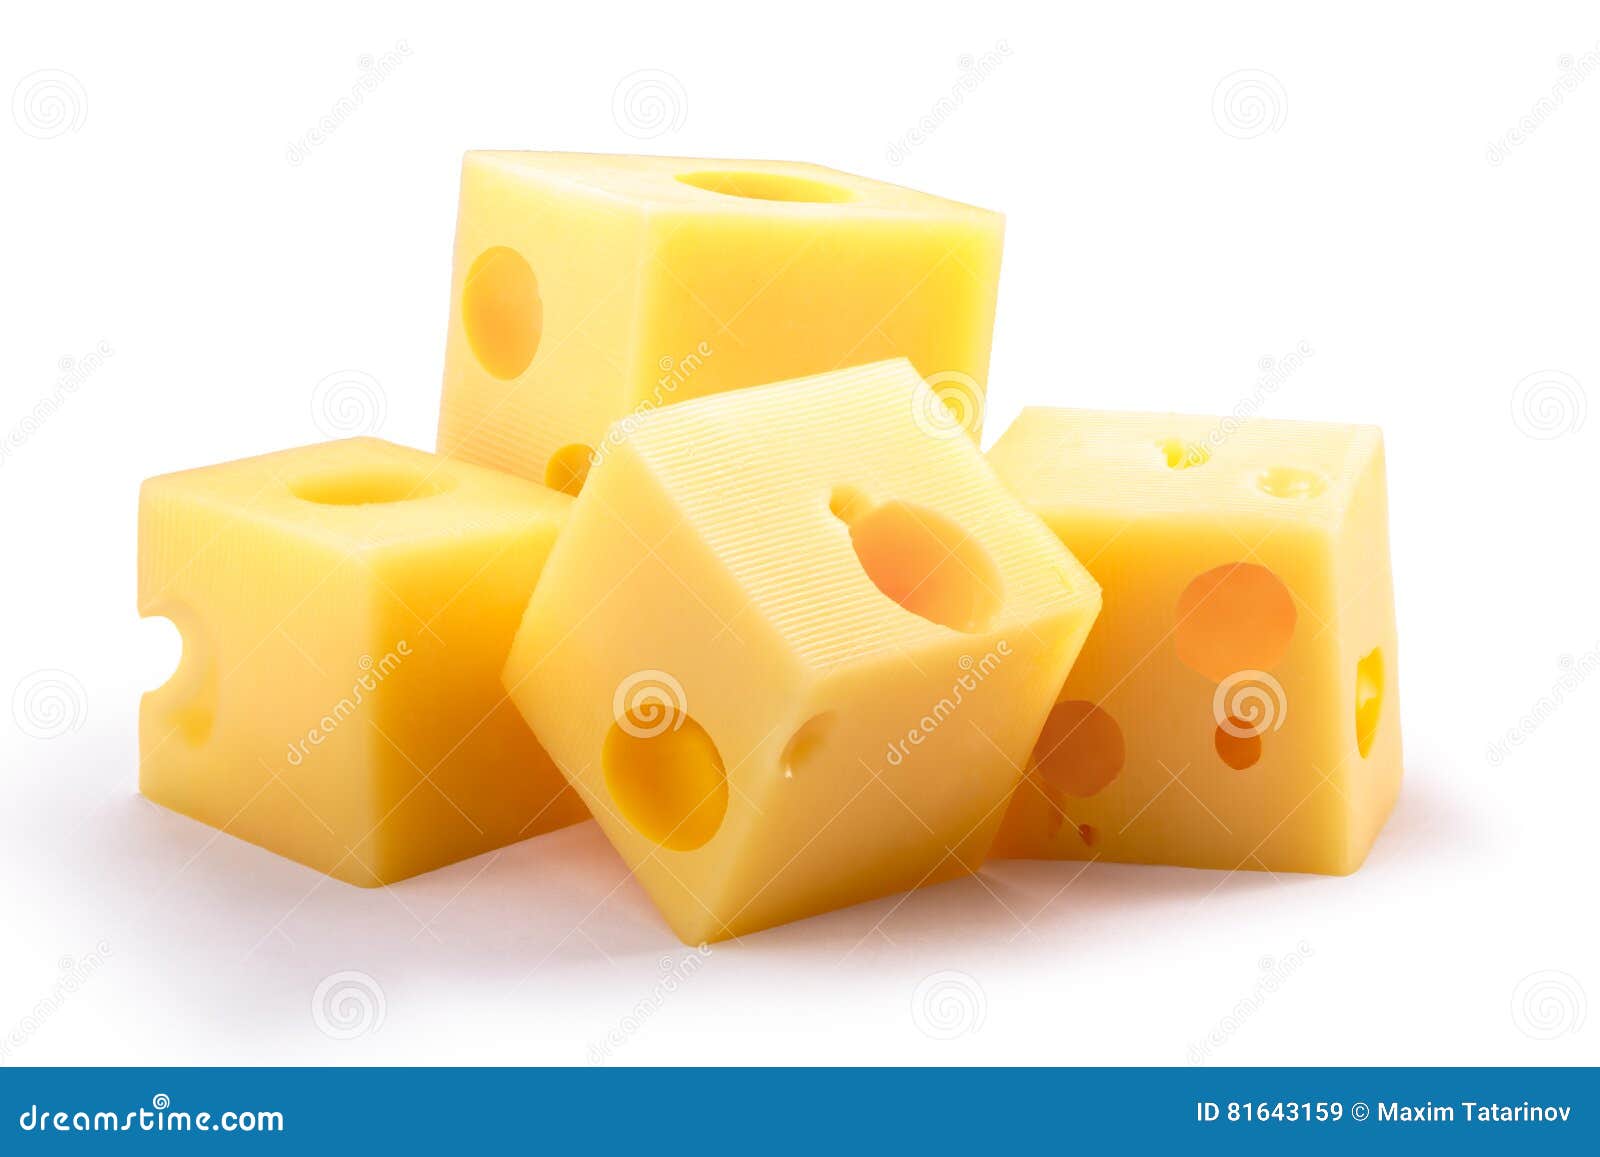 group of holey cheese cubes, paths